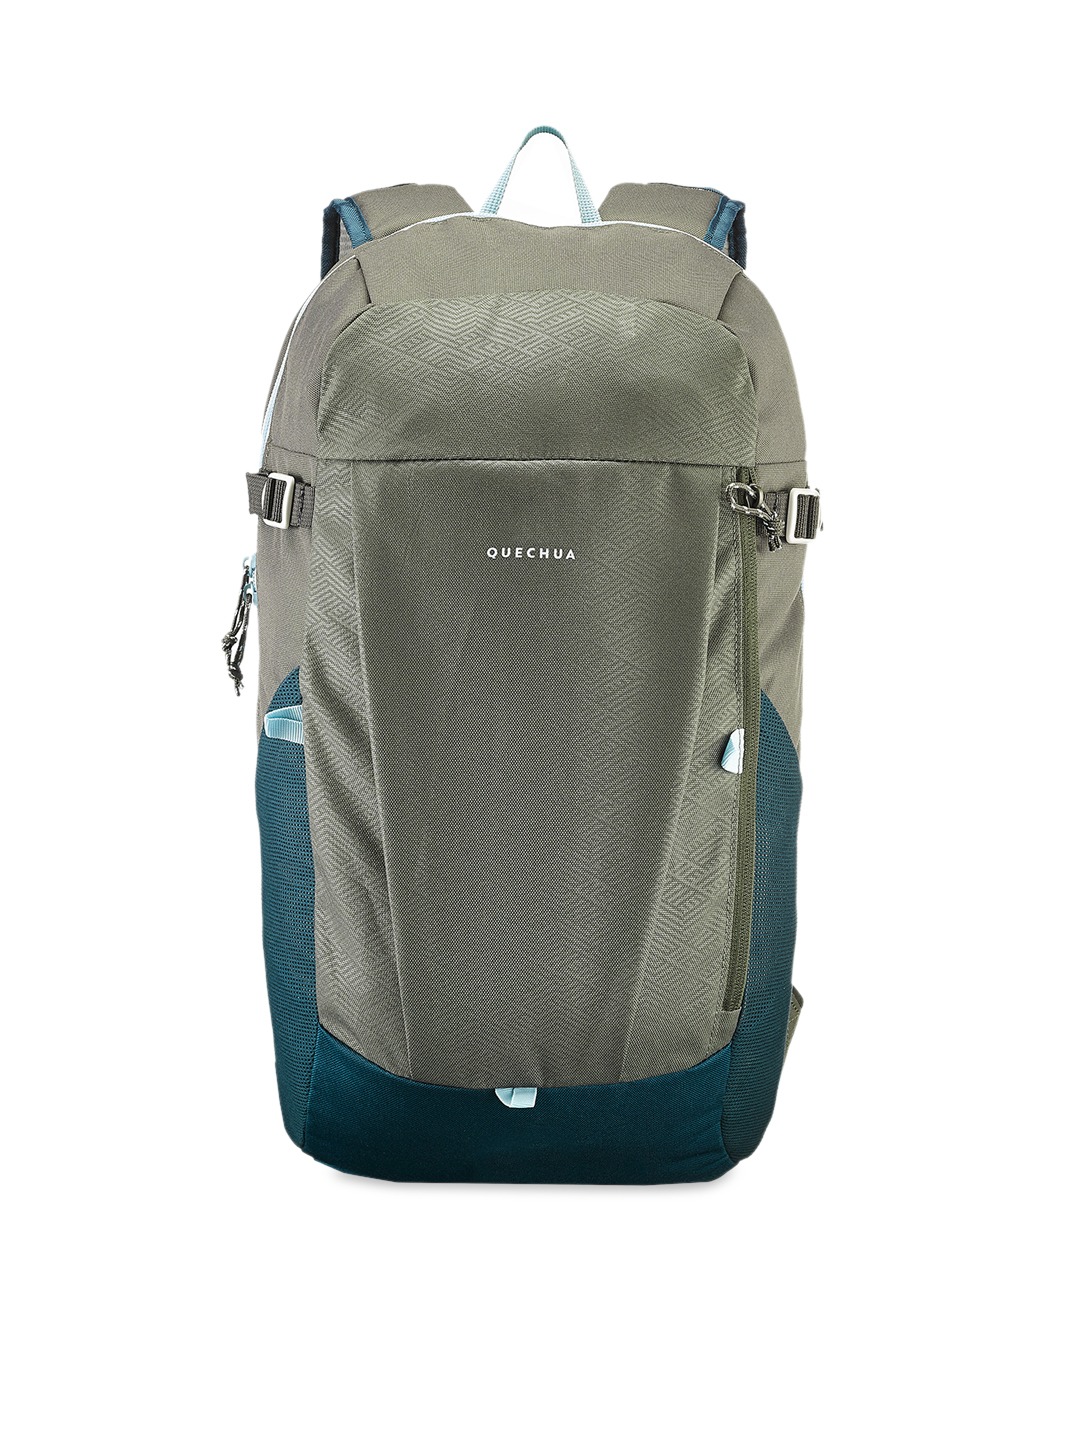 Accessories Backpacks | Quechua By Decathlon Unisex Olive Green Colourblocked Hiking Backpack NH100 - GQ97093